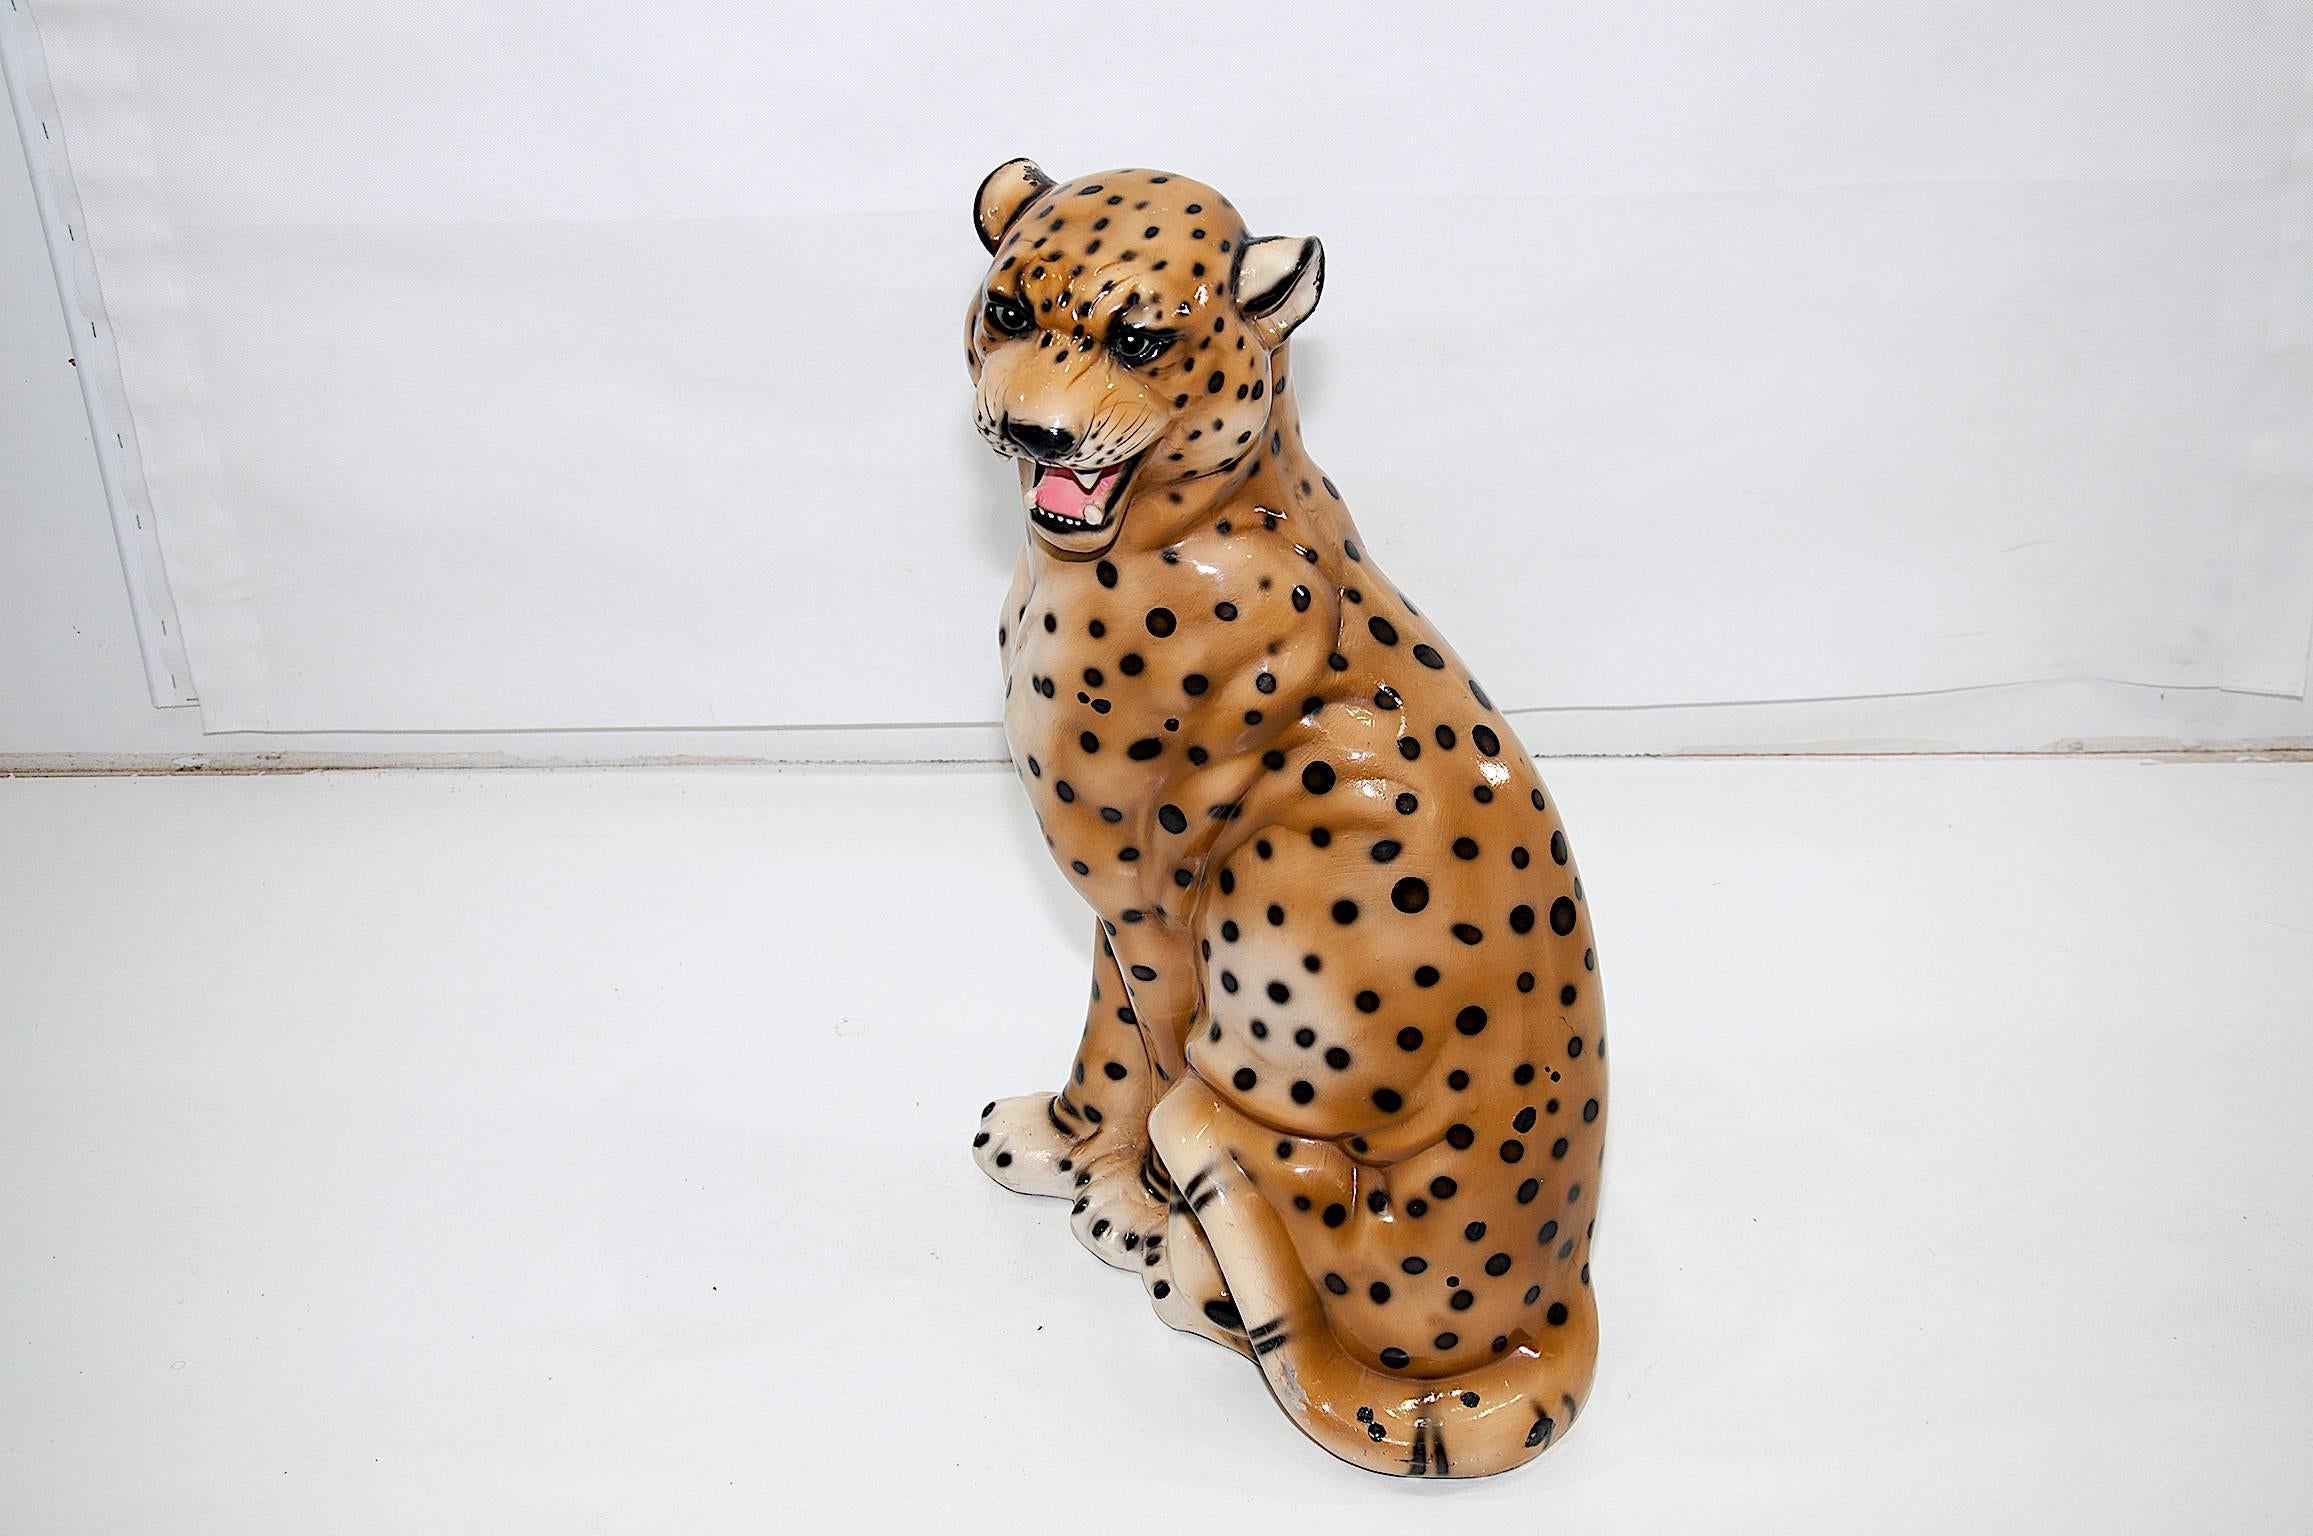 Mid-20th Century Large Leopard Italian Ceramic Sculpture from the 1950s with Hand-Painted Details